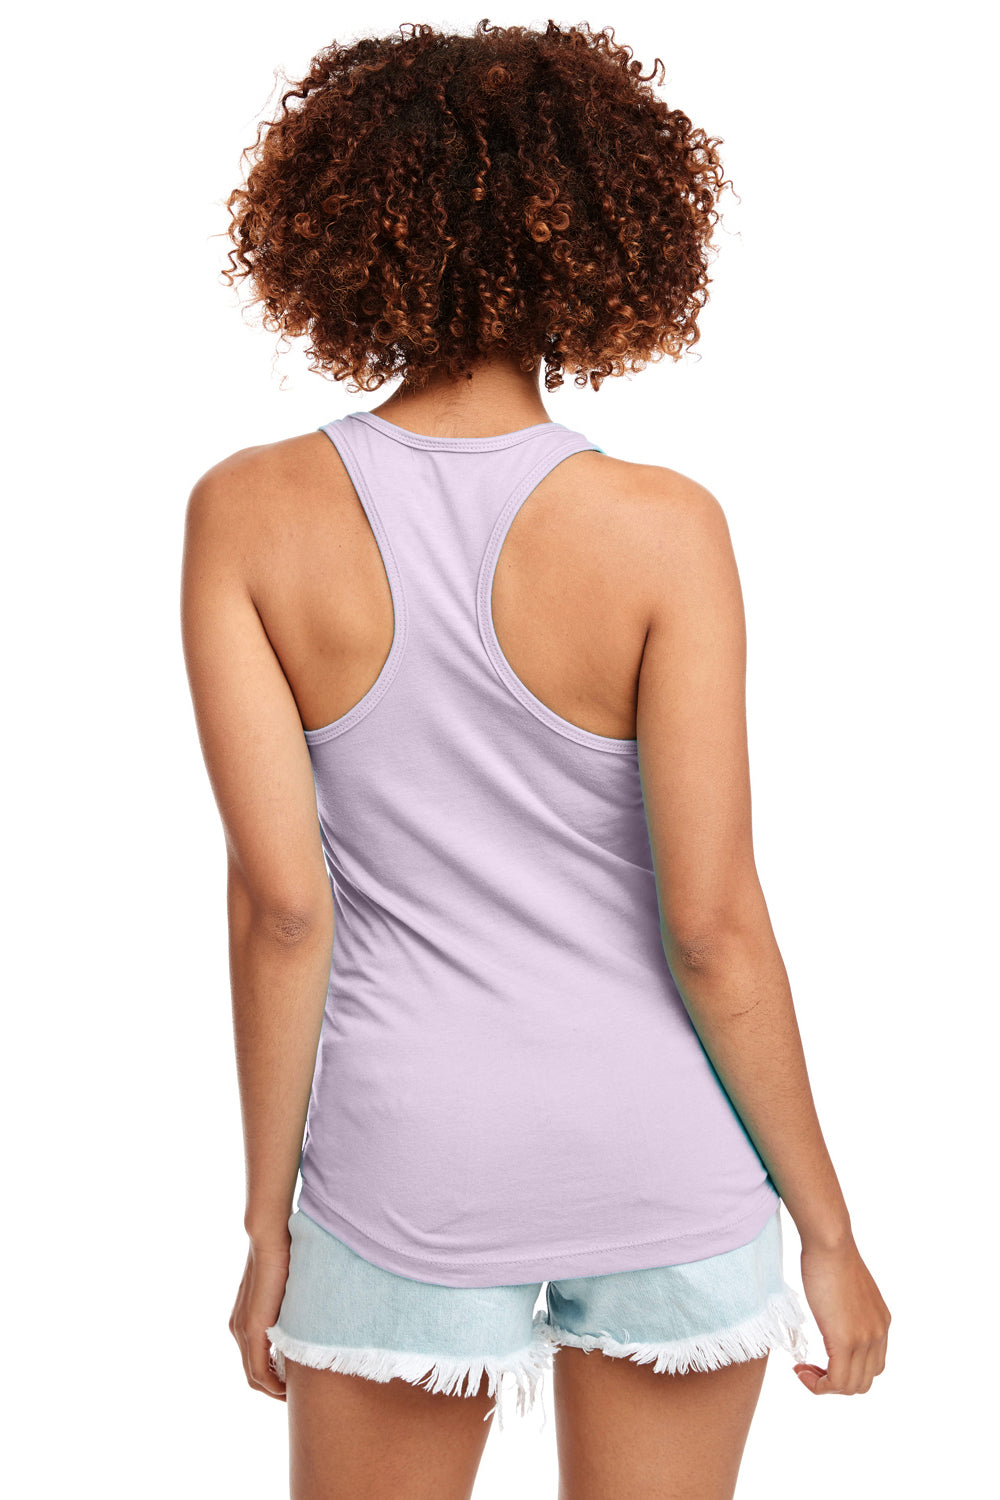 Next Level N1533 Womens Ideal Jersey Tank Top Lilac Pink Back